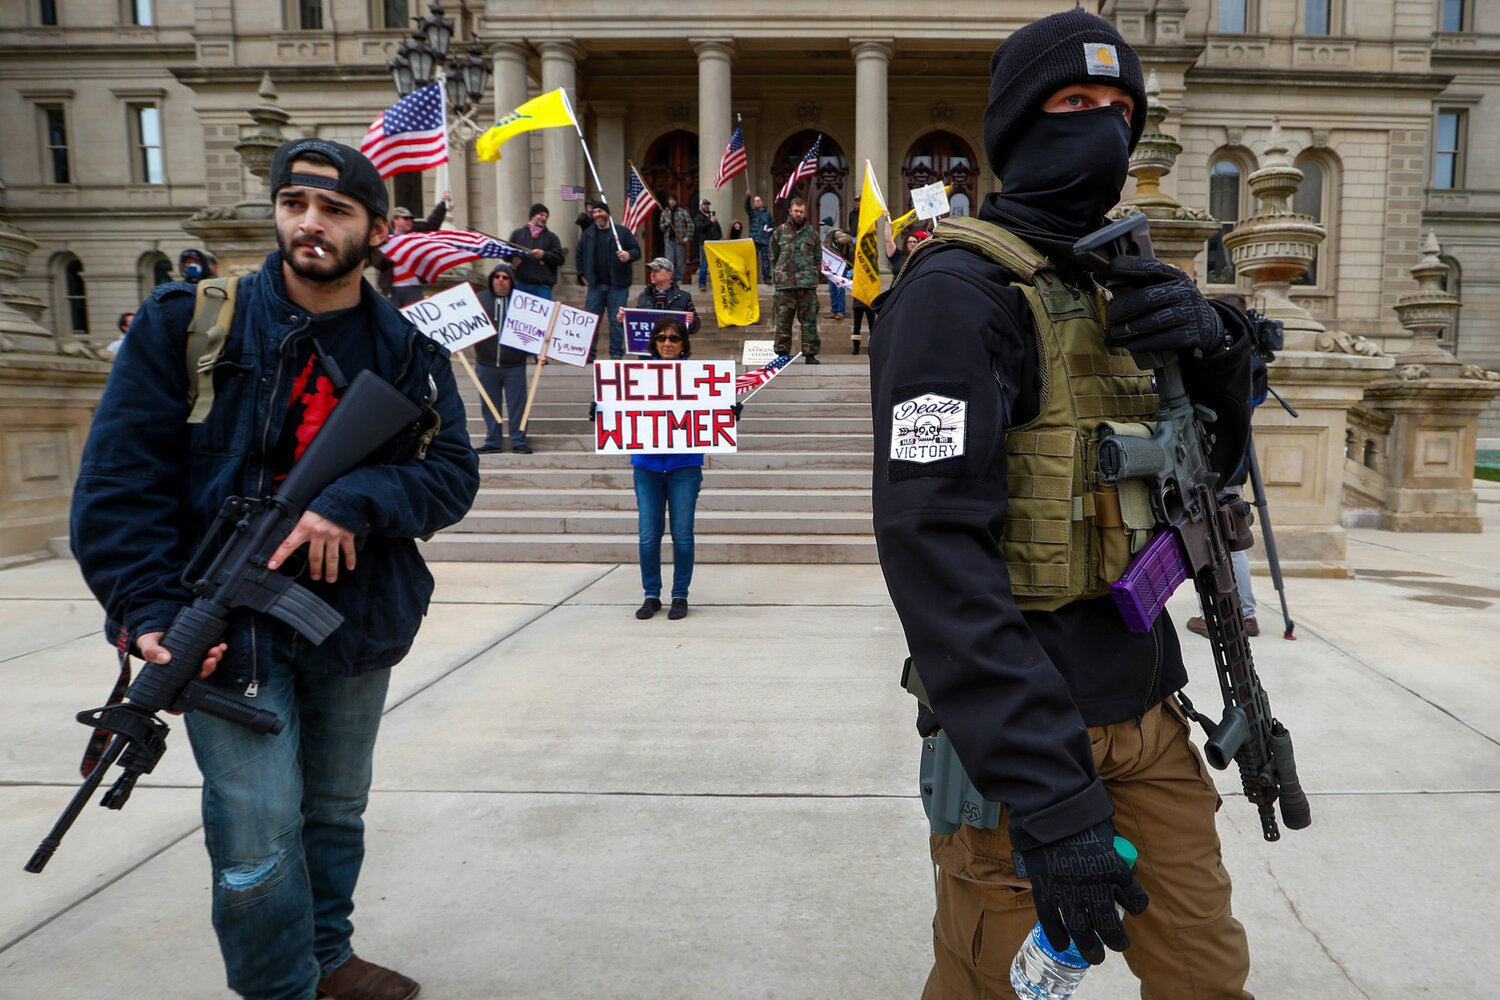  Men carry rifles near the steps of the State Capitol building in Lansing, Mich., on April 15, 2020, during a protest over Michigan Gov. Gretchen Whitmer's orders to keep people at home and businesses locked during the coronavirus outbreak. (AP Photo/Paul Sancya) 